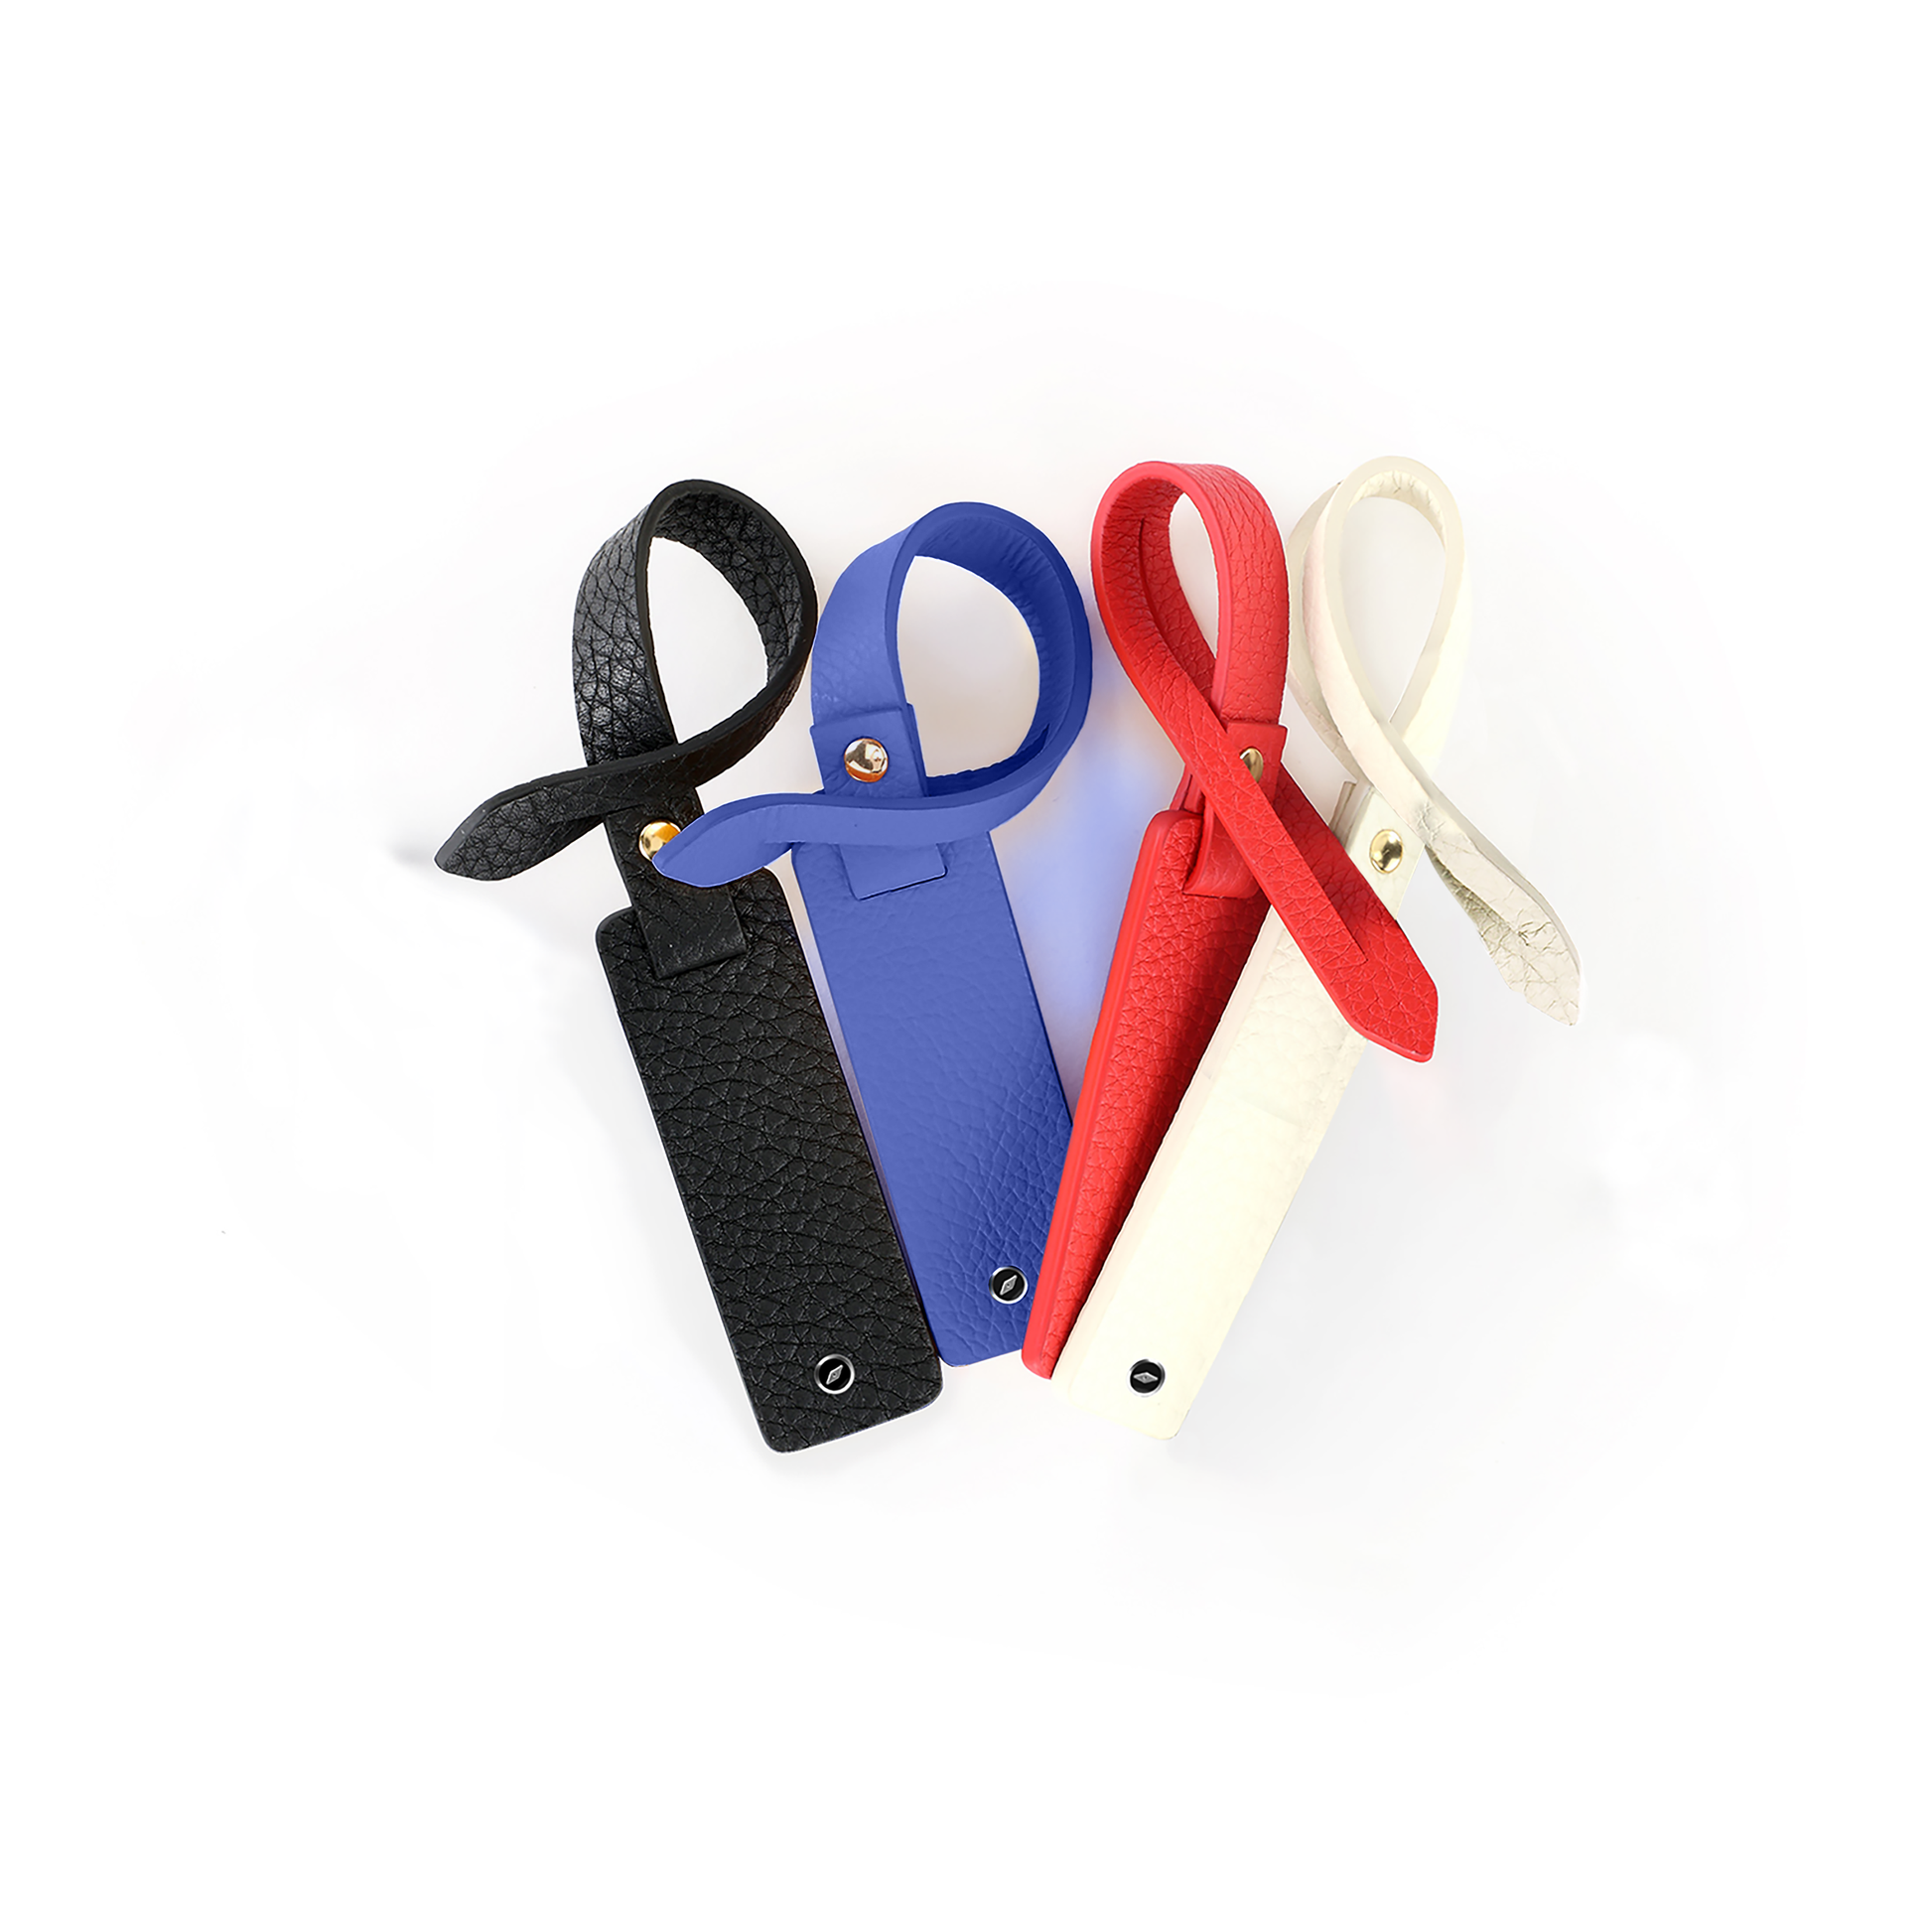 leather luggage tag by Gilbano